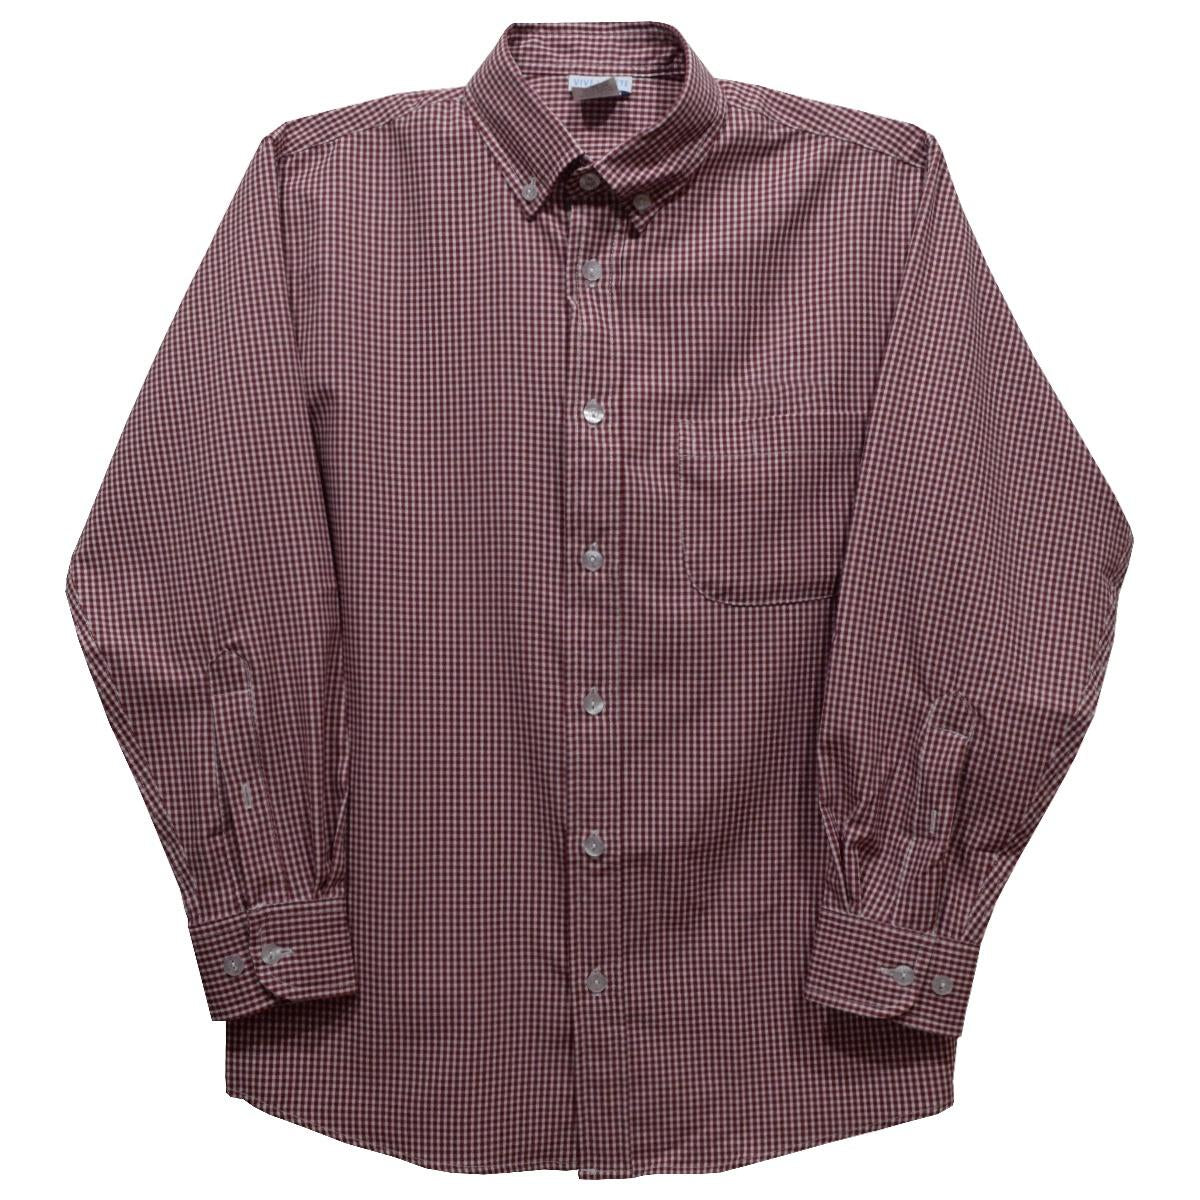 MAROON GINGHAM L/S